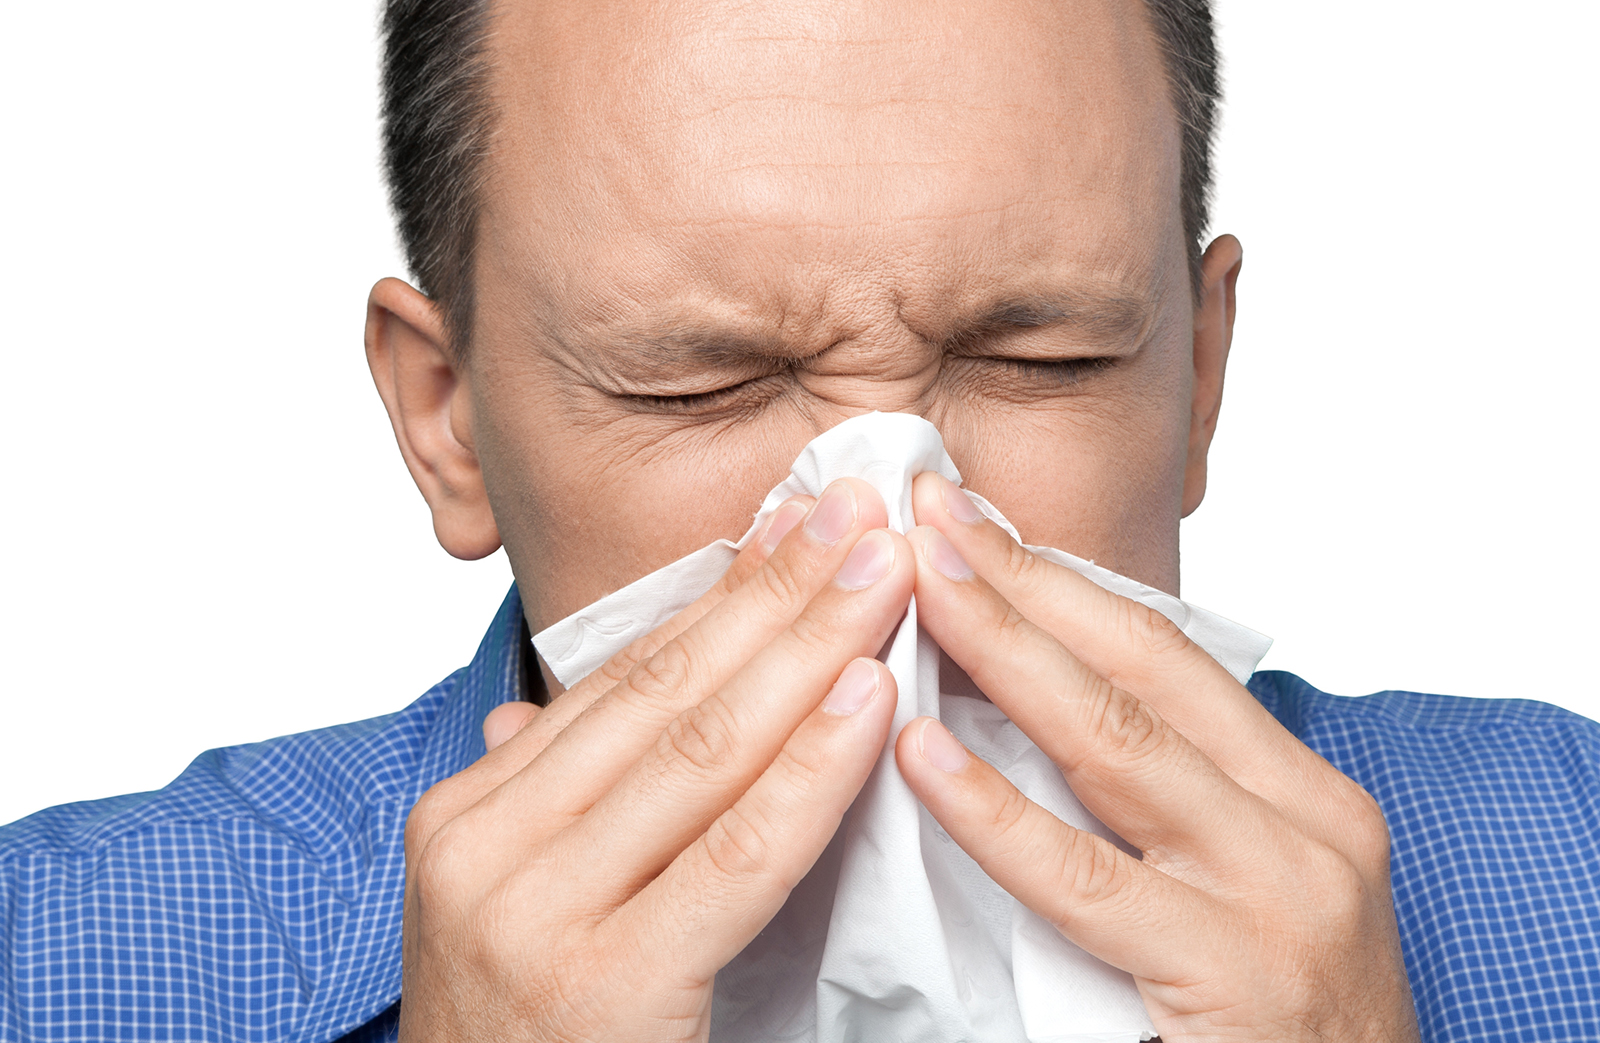 Are hardwood floors or carpets better for allergies?